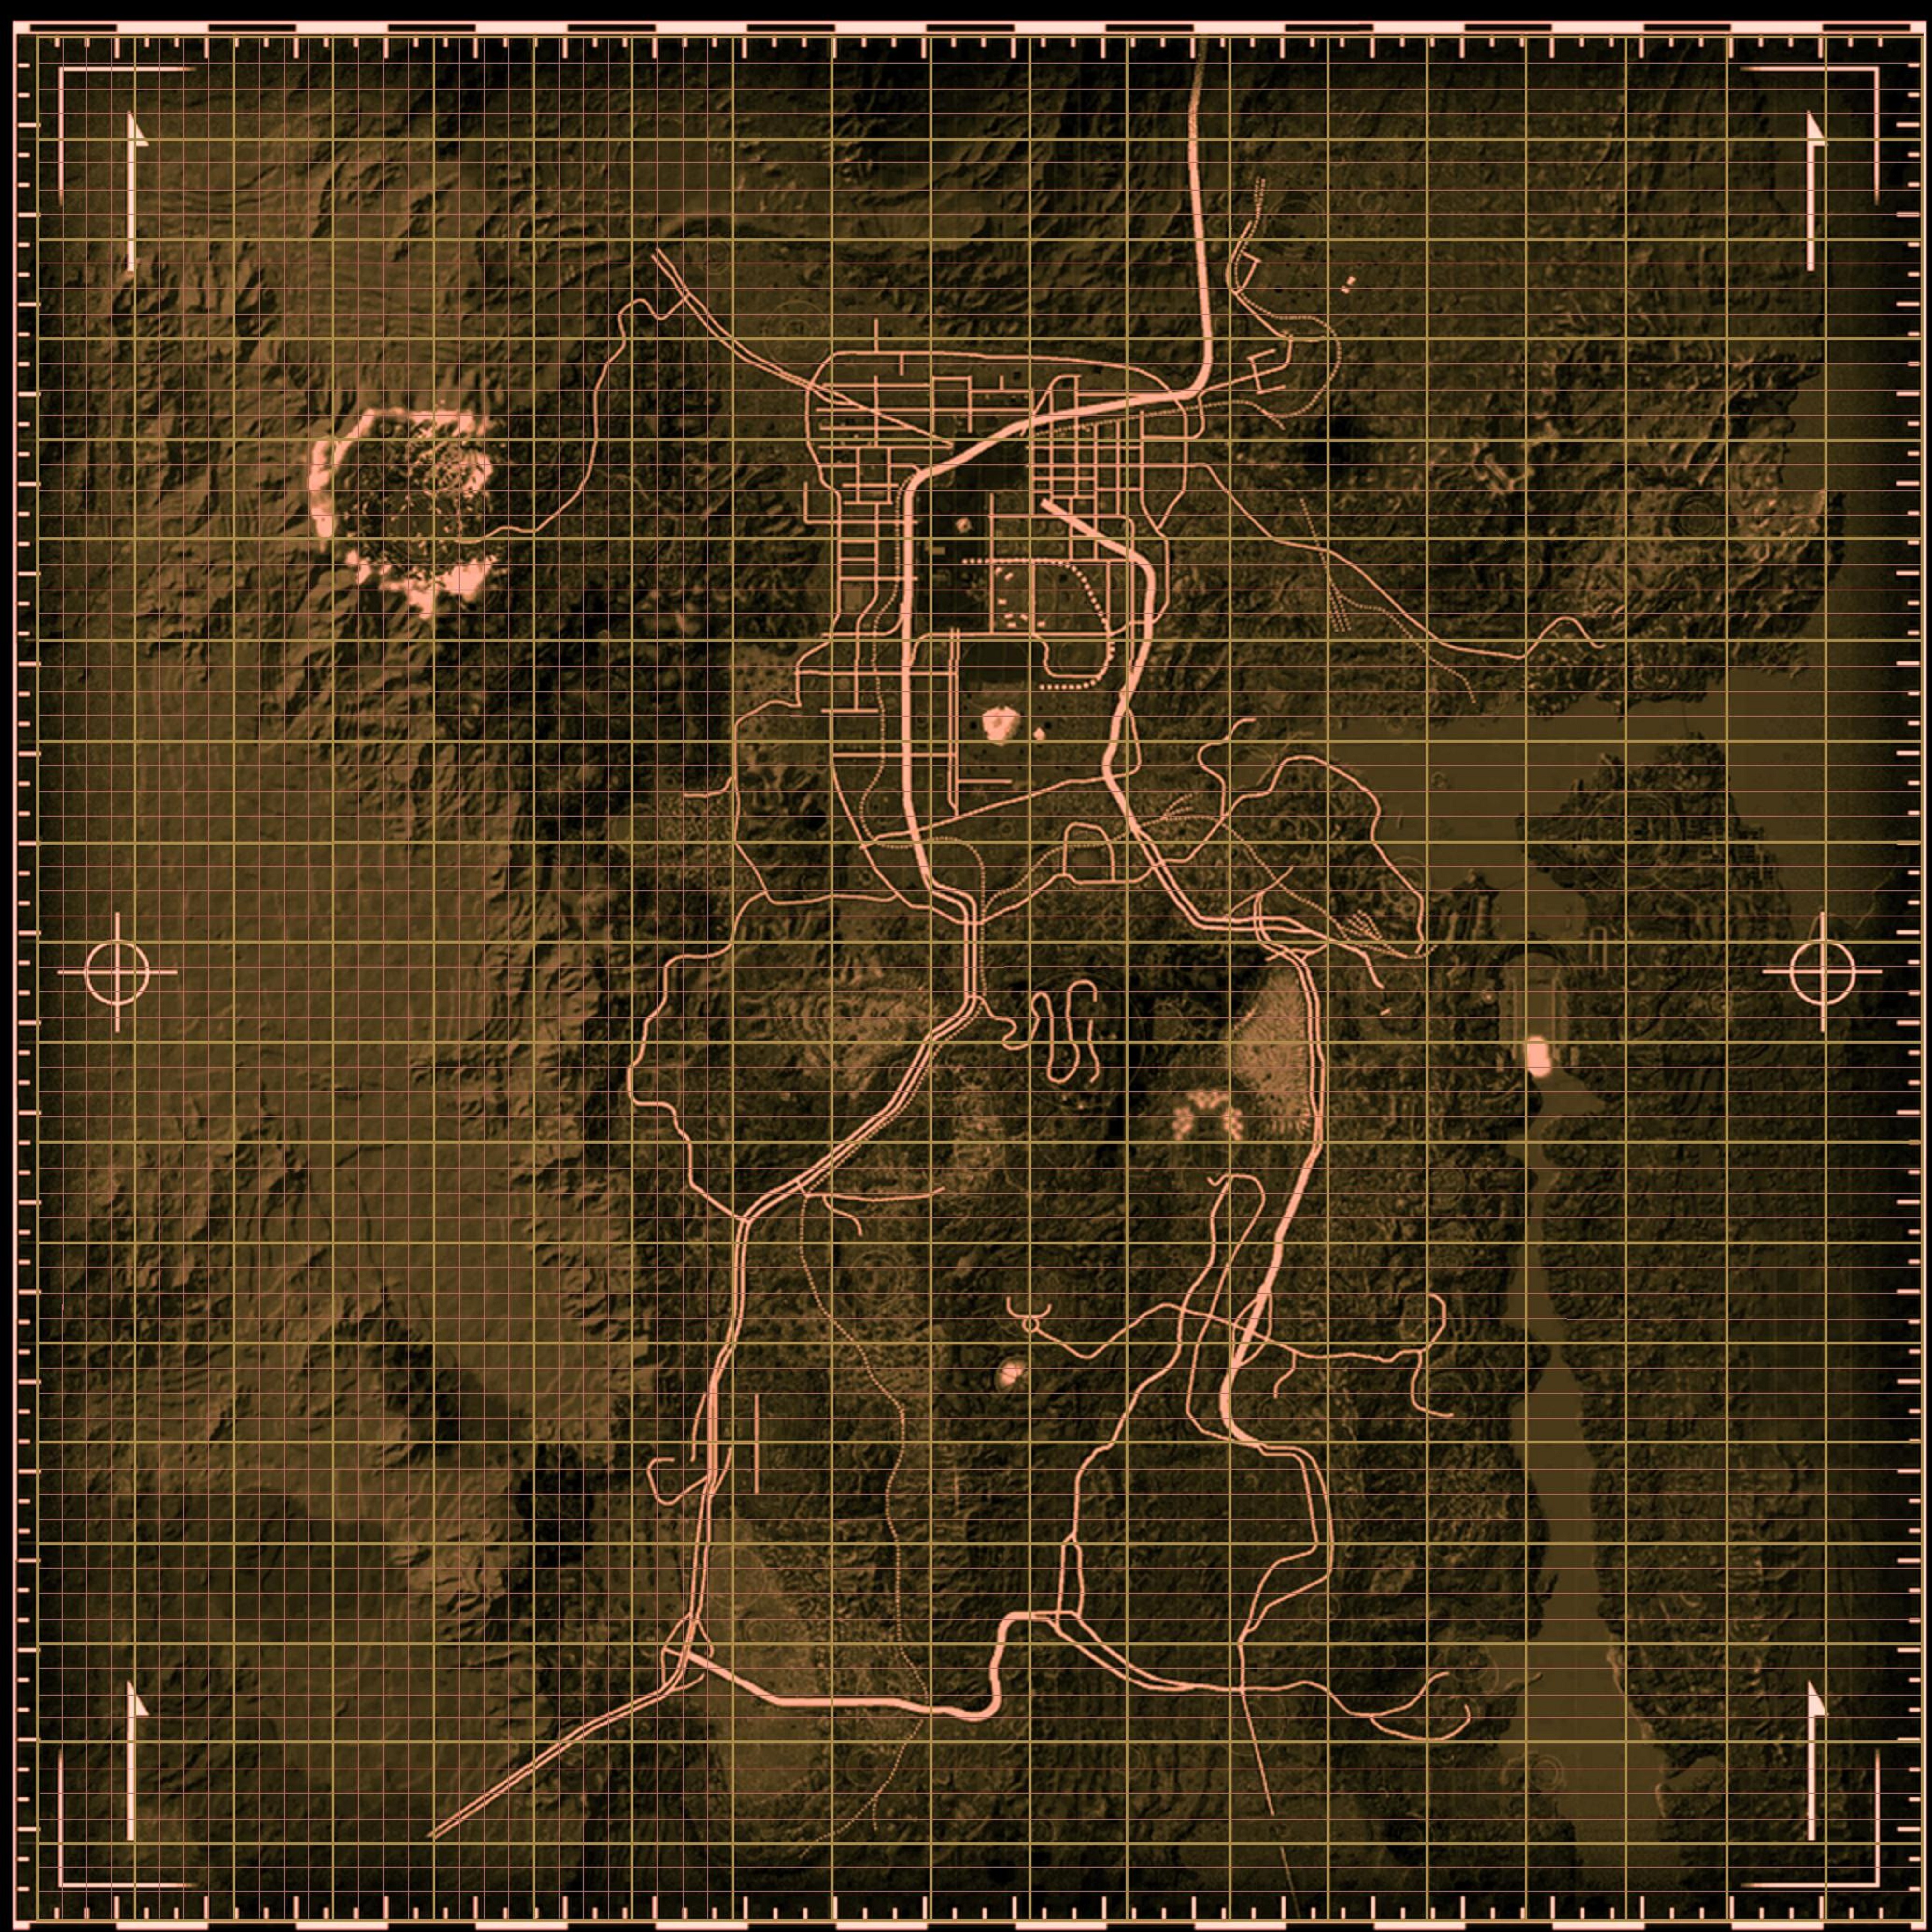 fallout new vegas map all locations